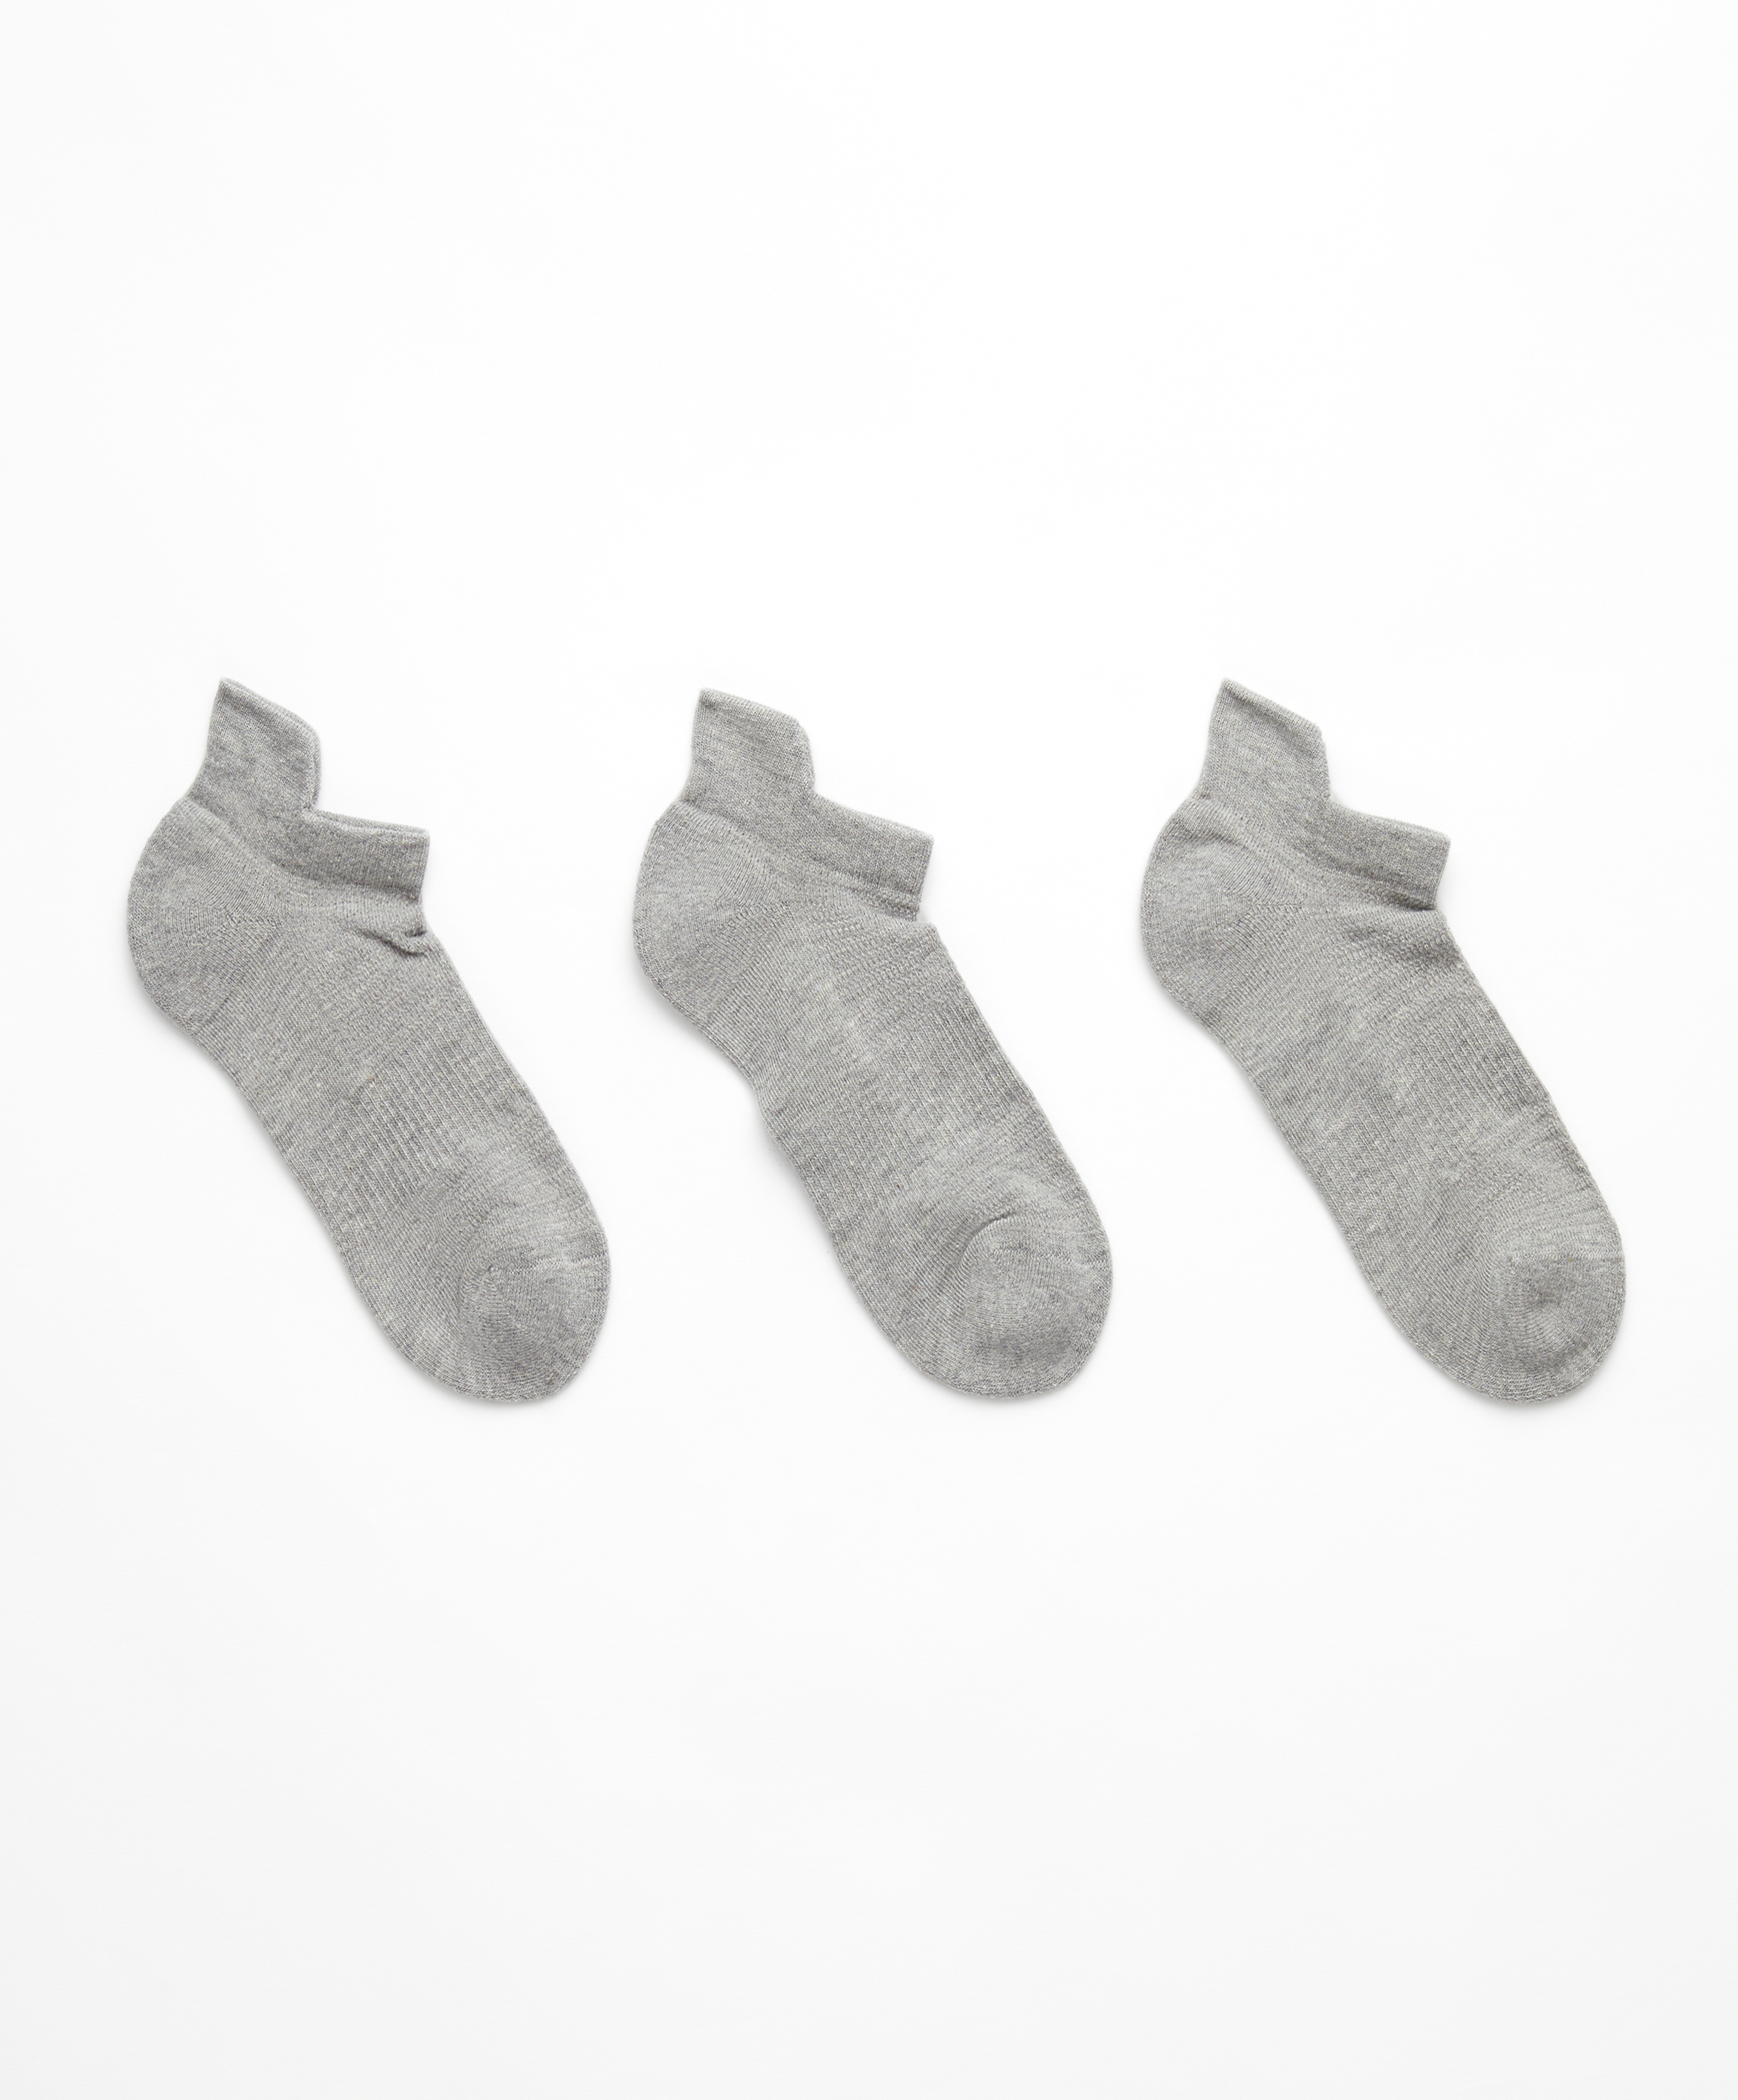 3 pairs of tab sports sneaker socks with cotton